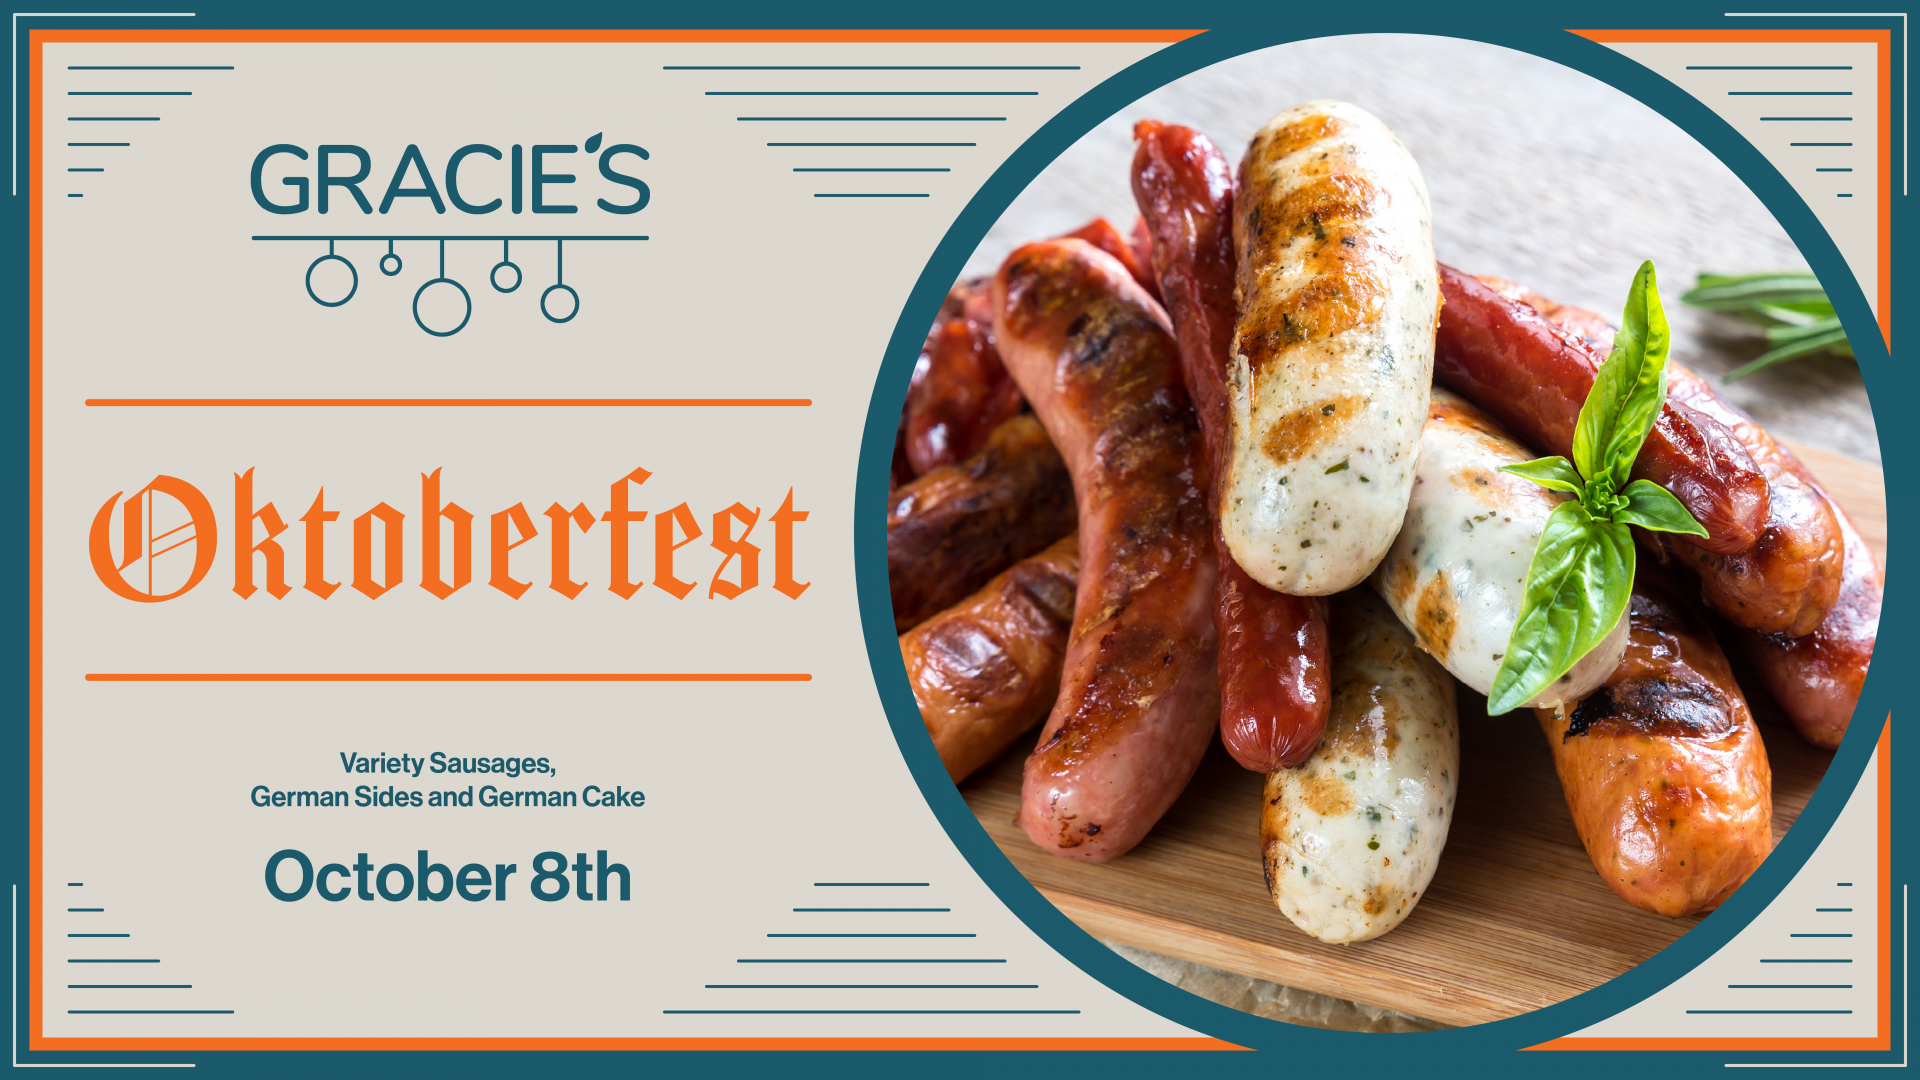 grey background with a circle shaped image of sausages and Gracie's Oktoberfest text